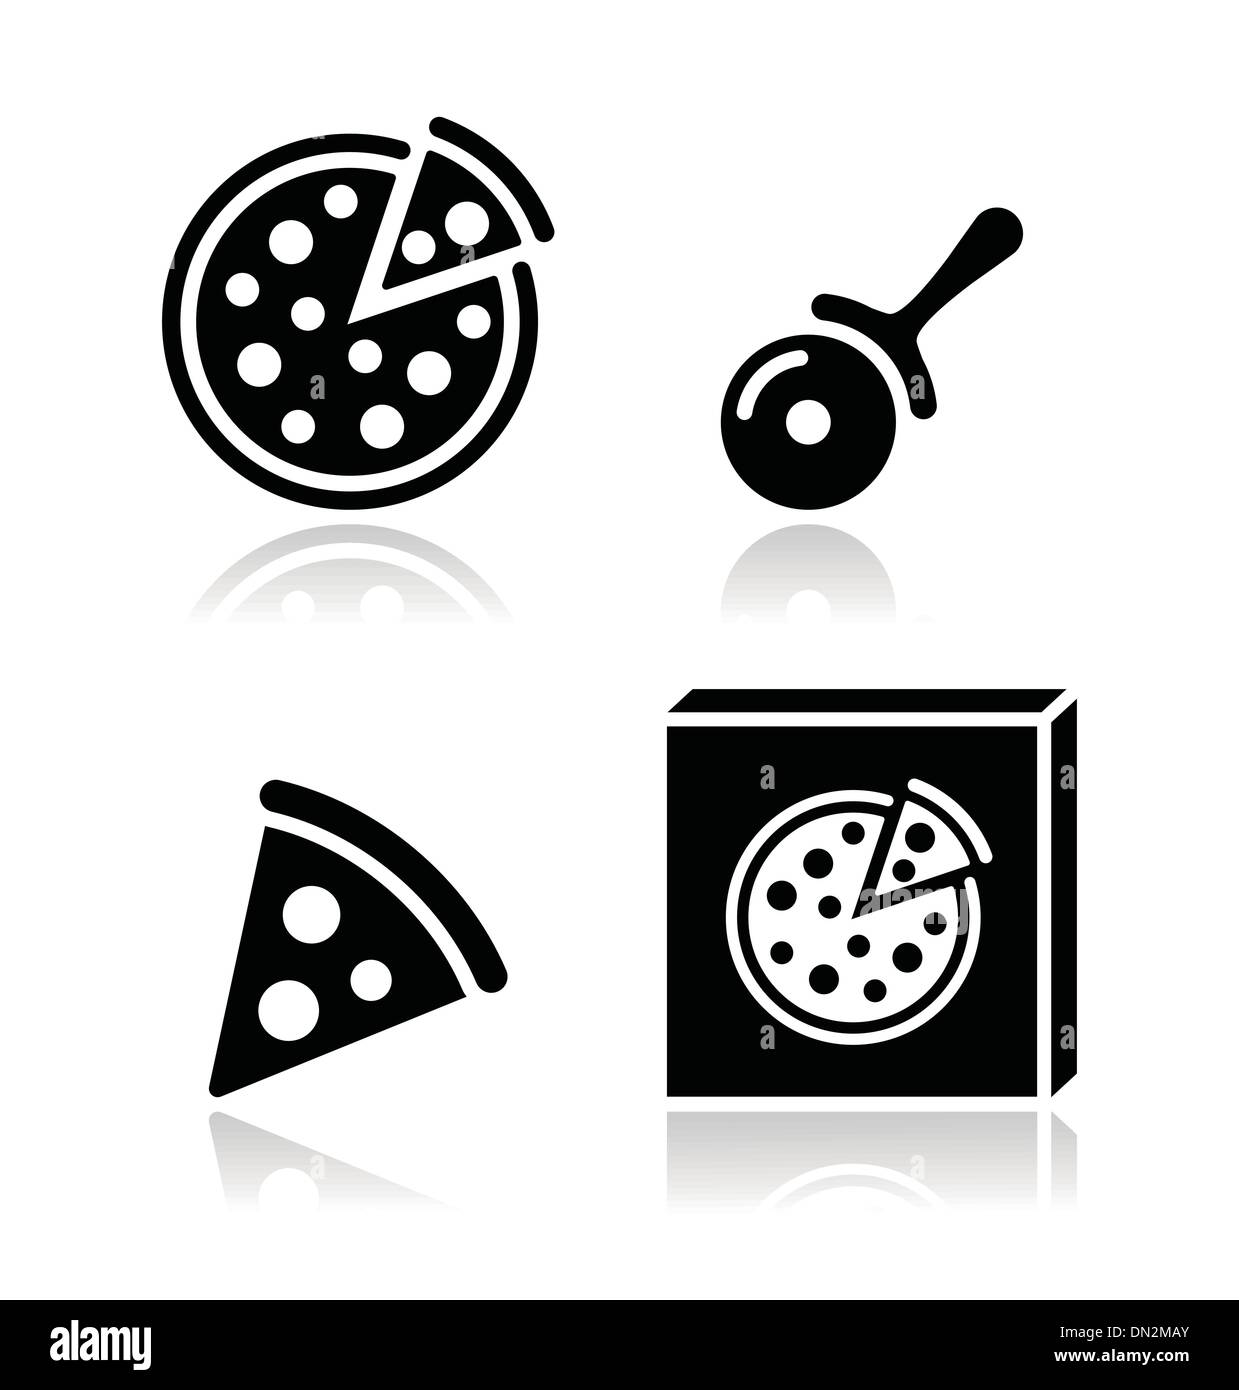 Pizza vector icons set with reflections Stock Vector